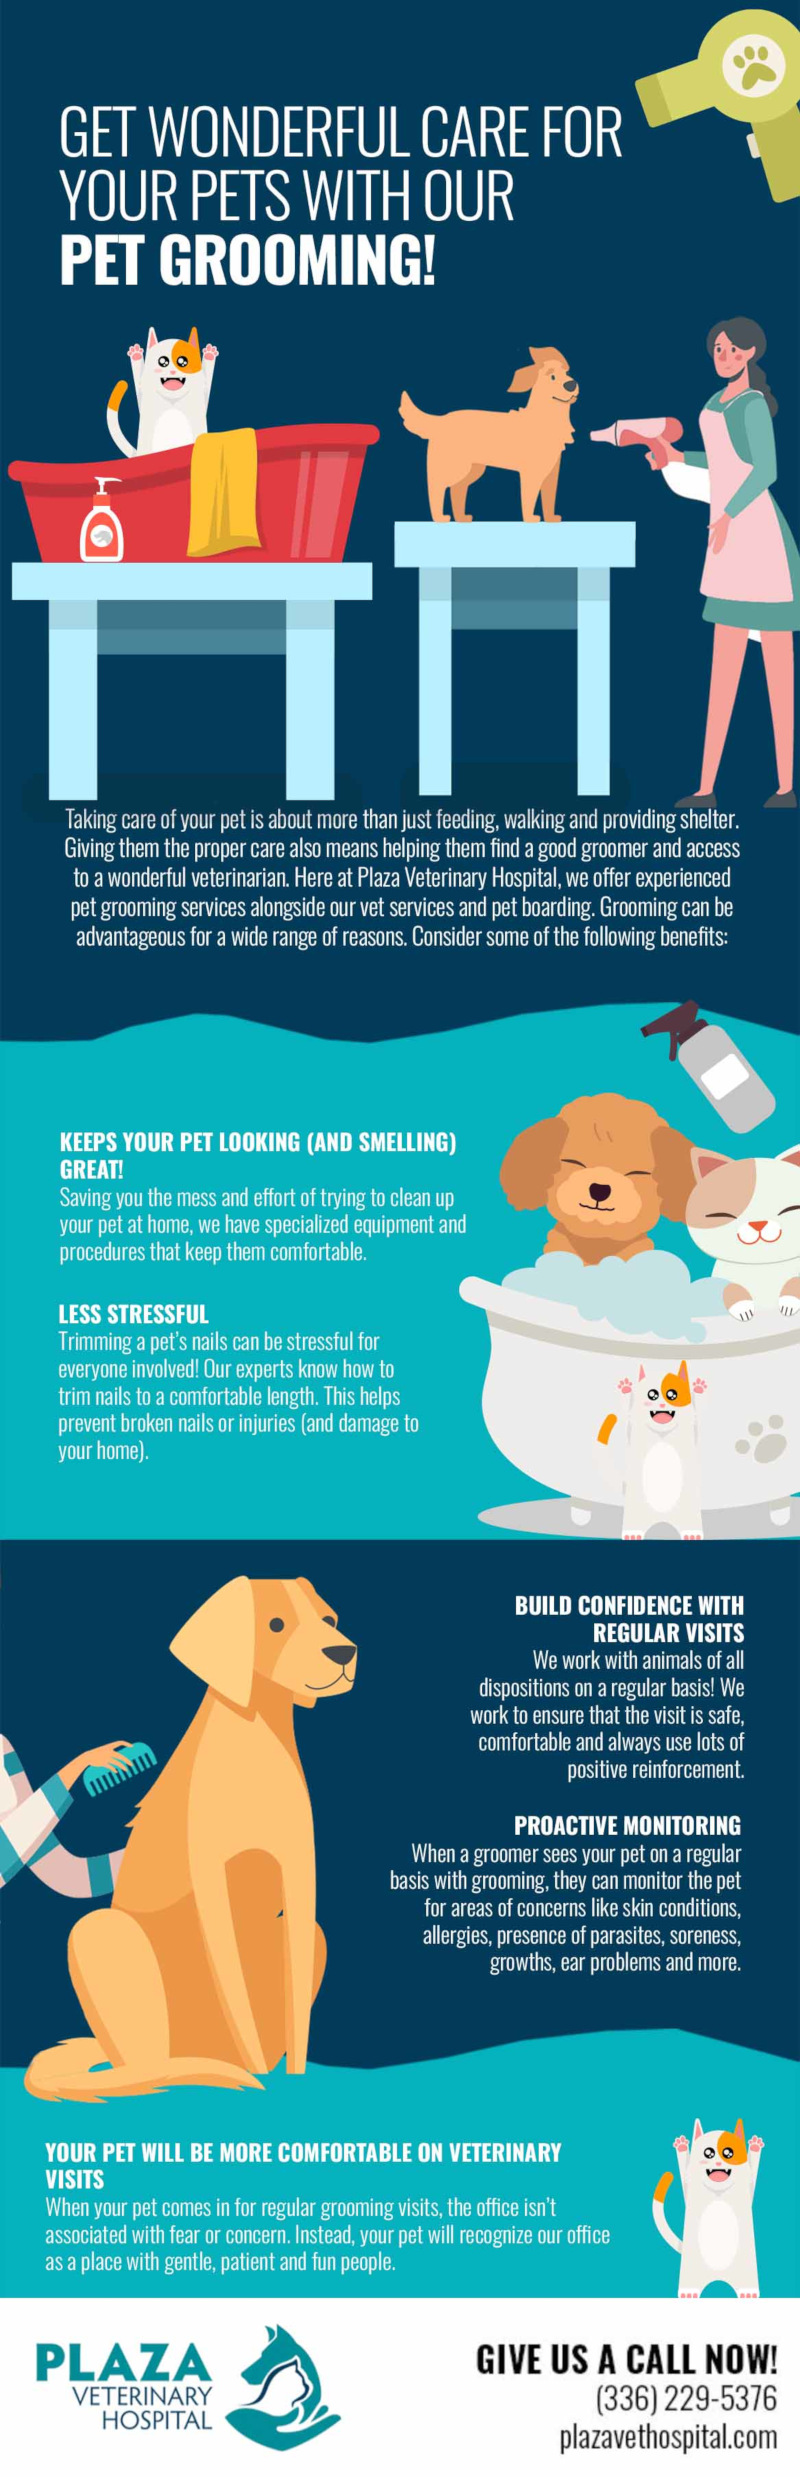 Get Wonderful Care for Your Pets with Our Pet Grooming! [infographic]